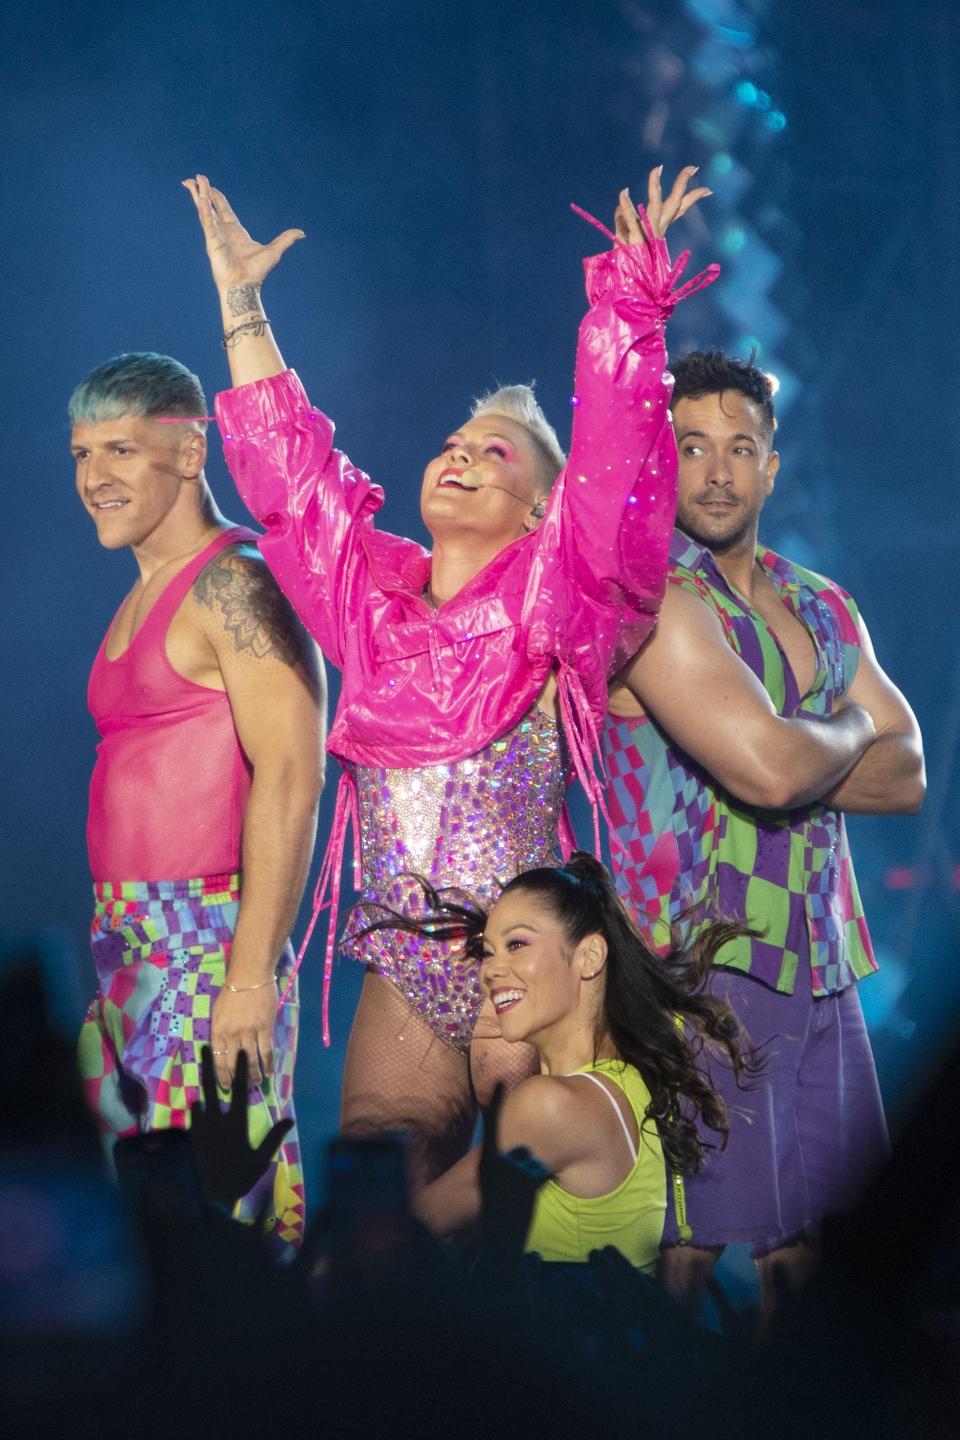 Pink recently announced she's pausing her tour due to an undisclosed health issue – once again starting a conversation about how much we owe people regarding private medical conditions.